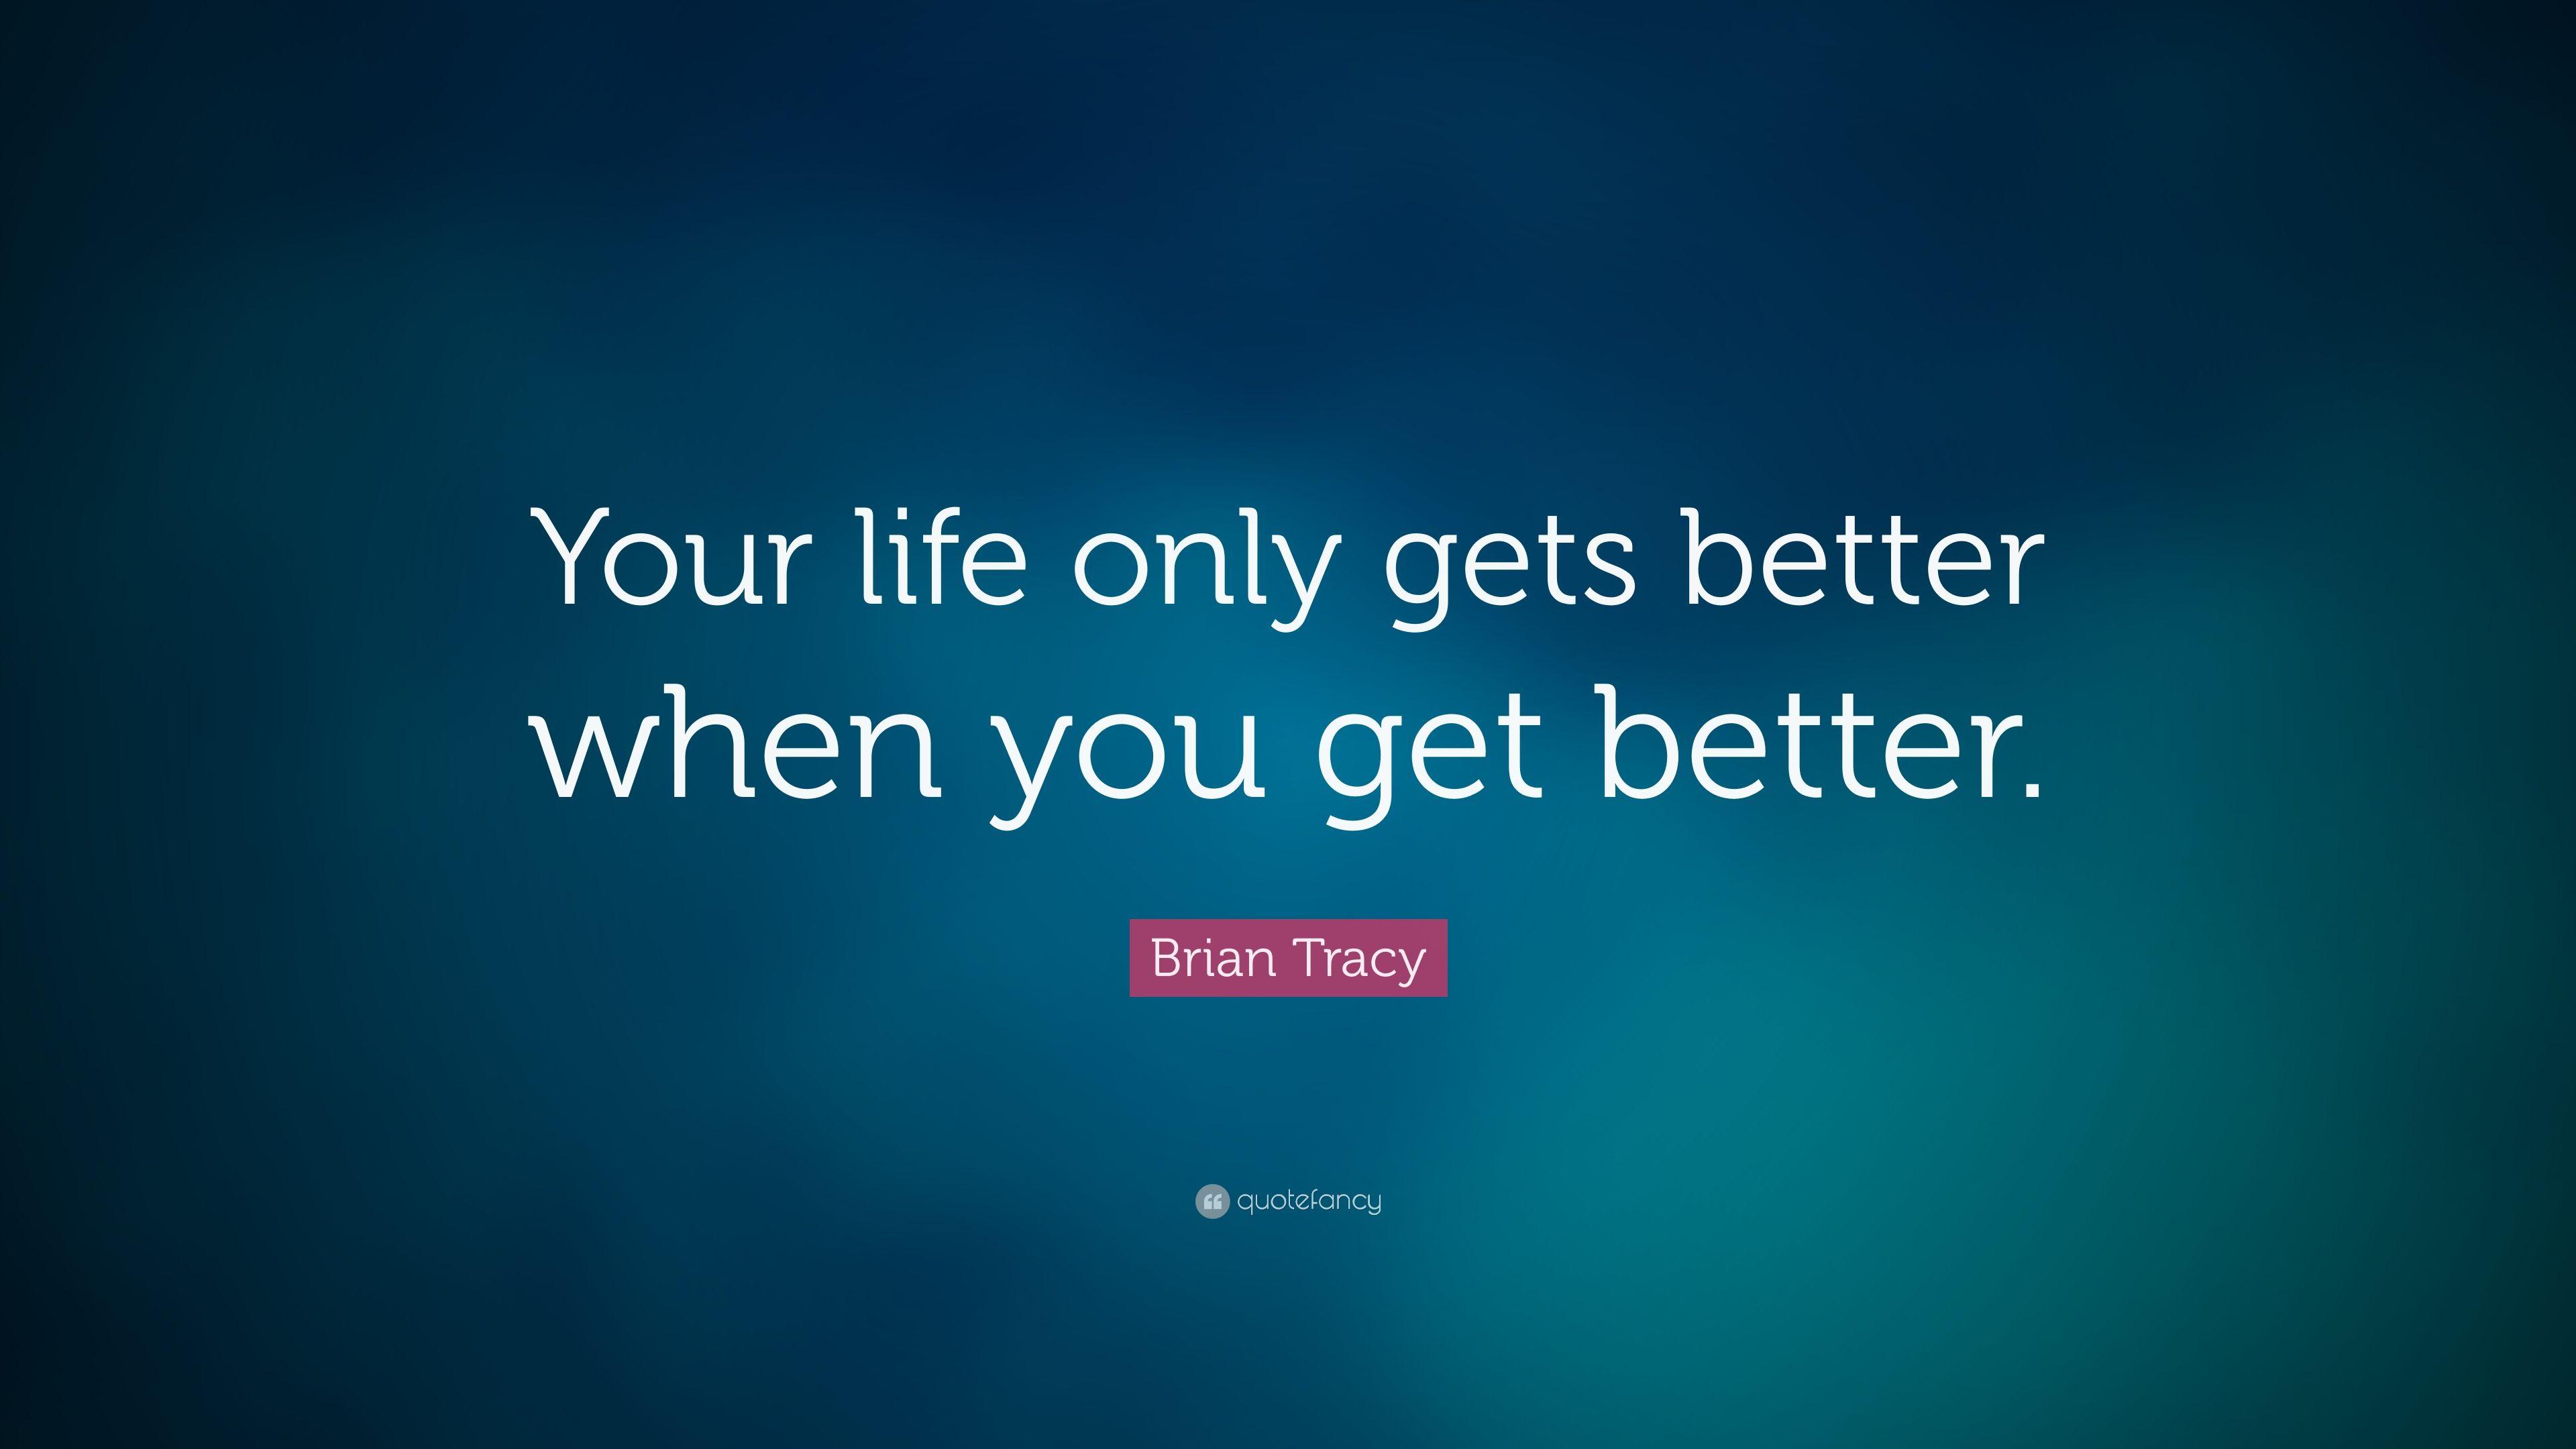 Brian Tracy Quote: “Your life only gets better when you get better